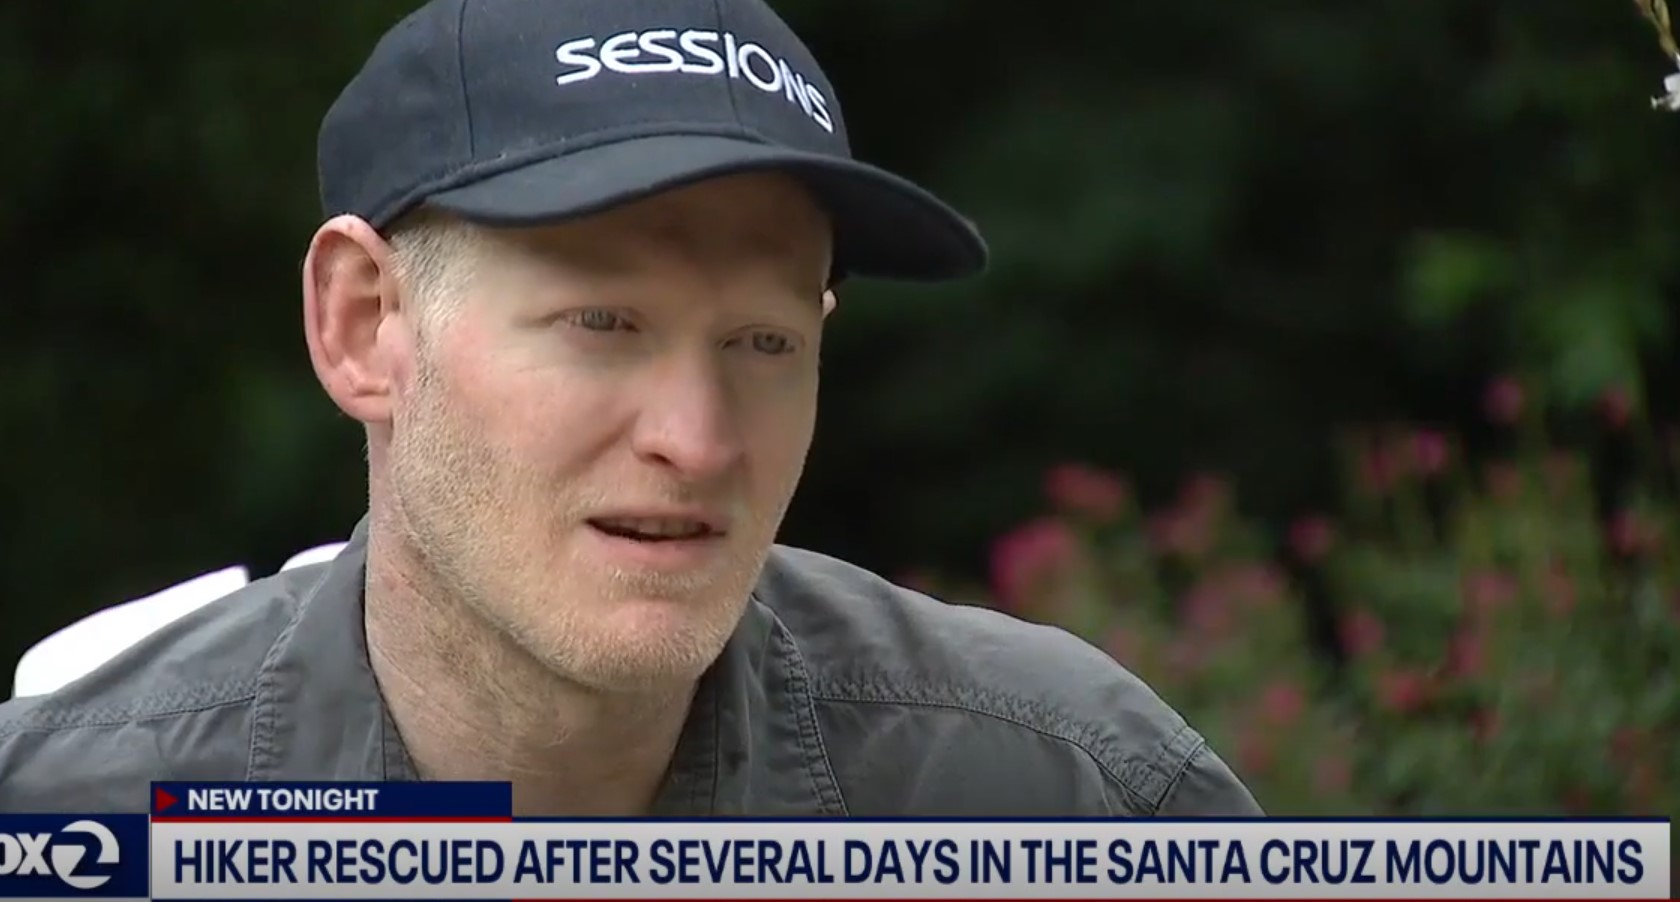 Missing hiker in Santa Cruz mountains survives by drinking water from boot for 10 days 2